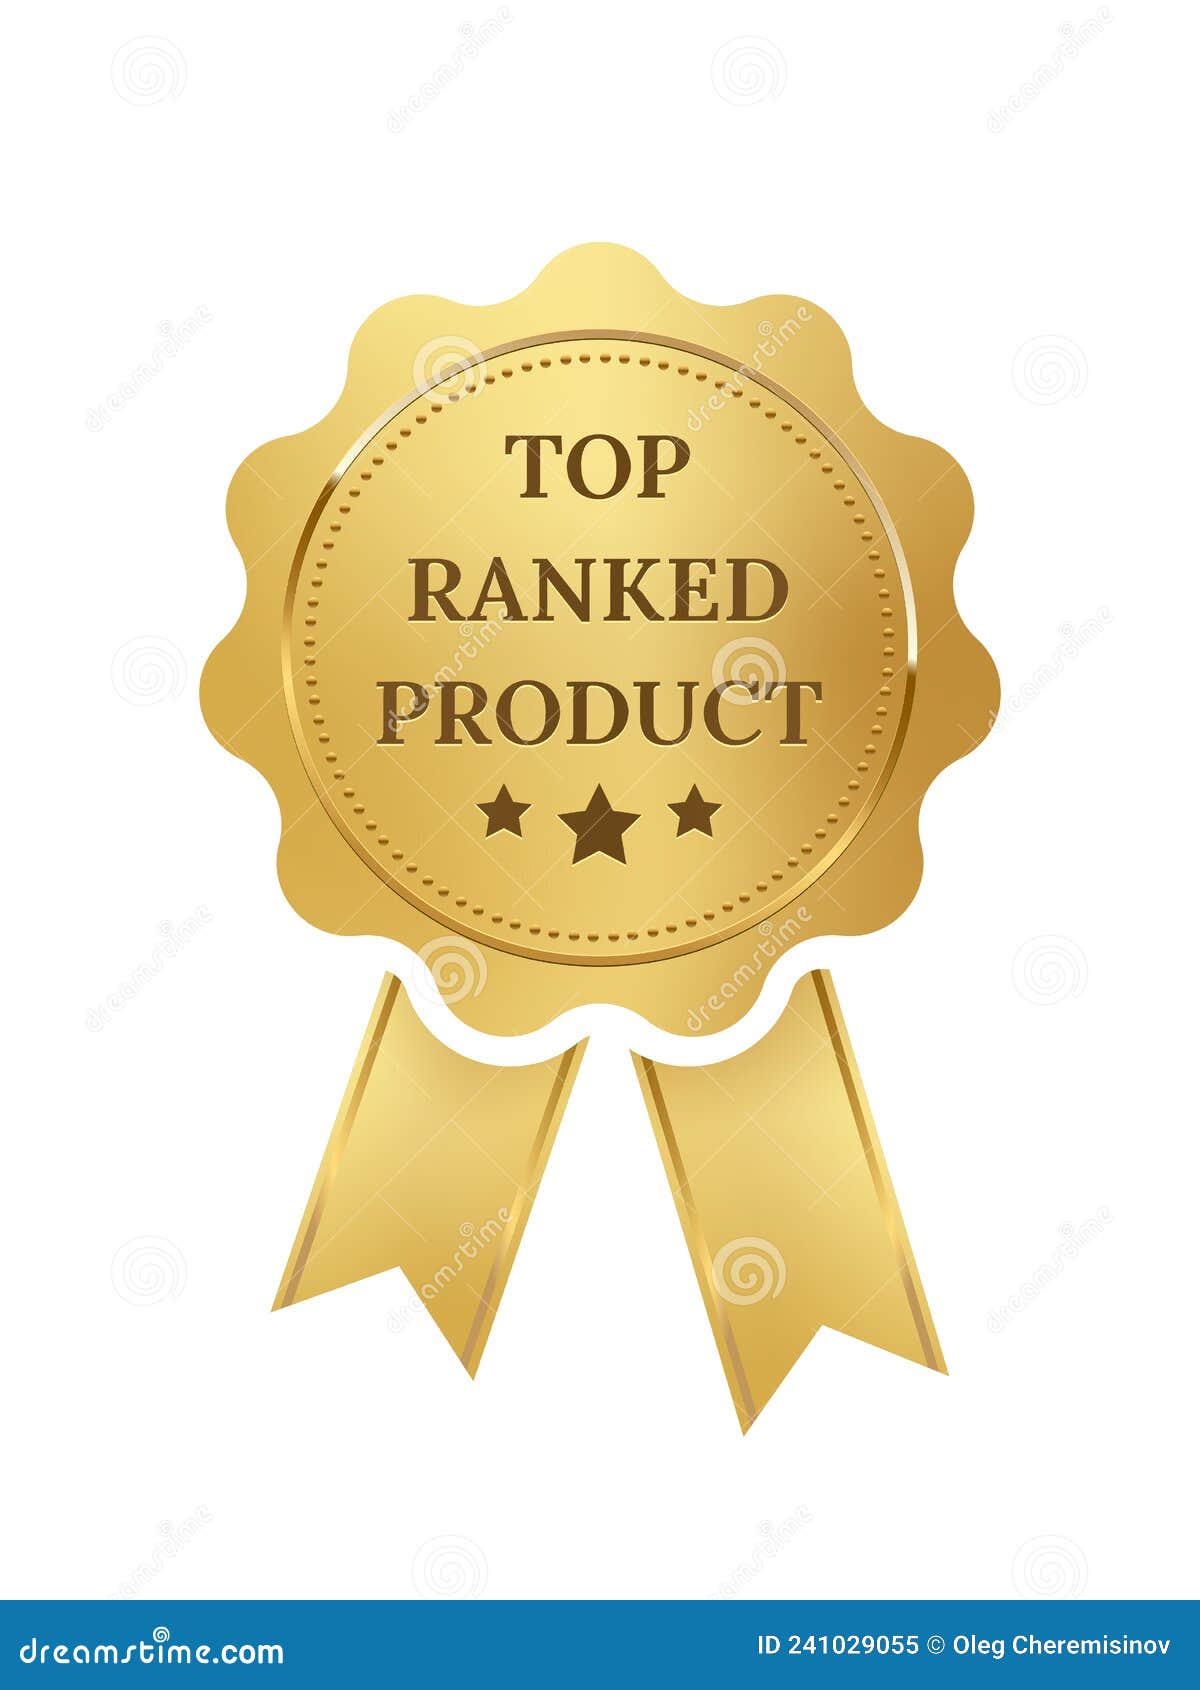 gold seal with ribbons for top ranked product, medal for best quality, award for first place winners